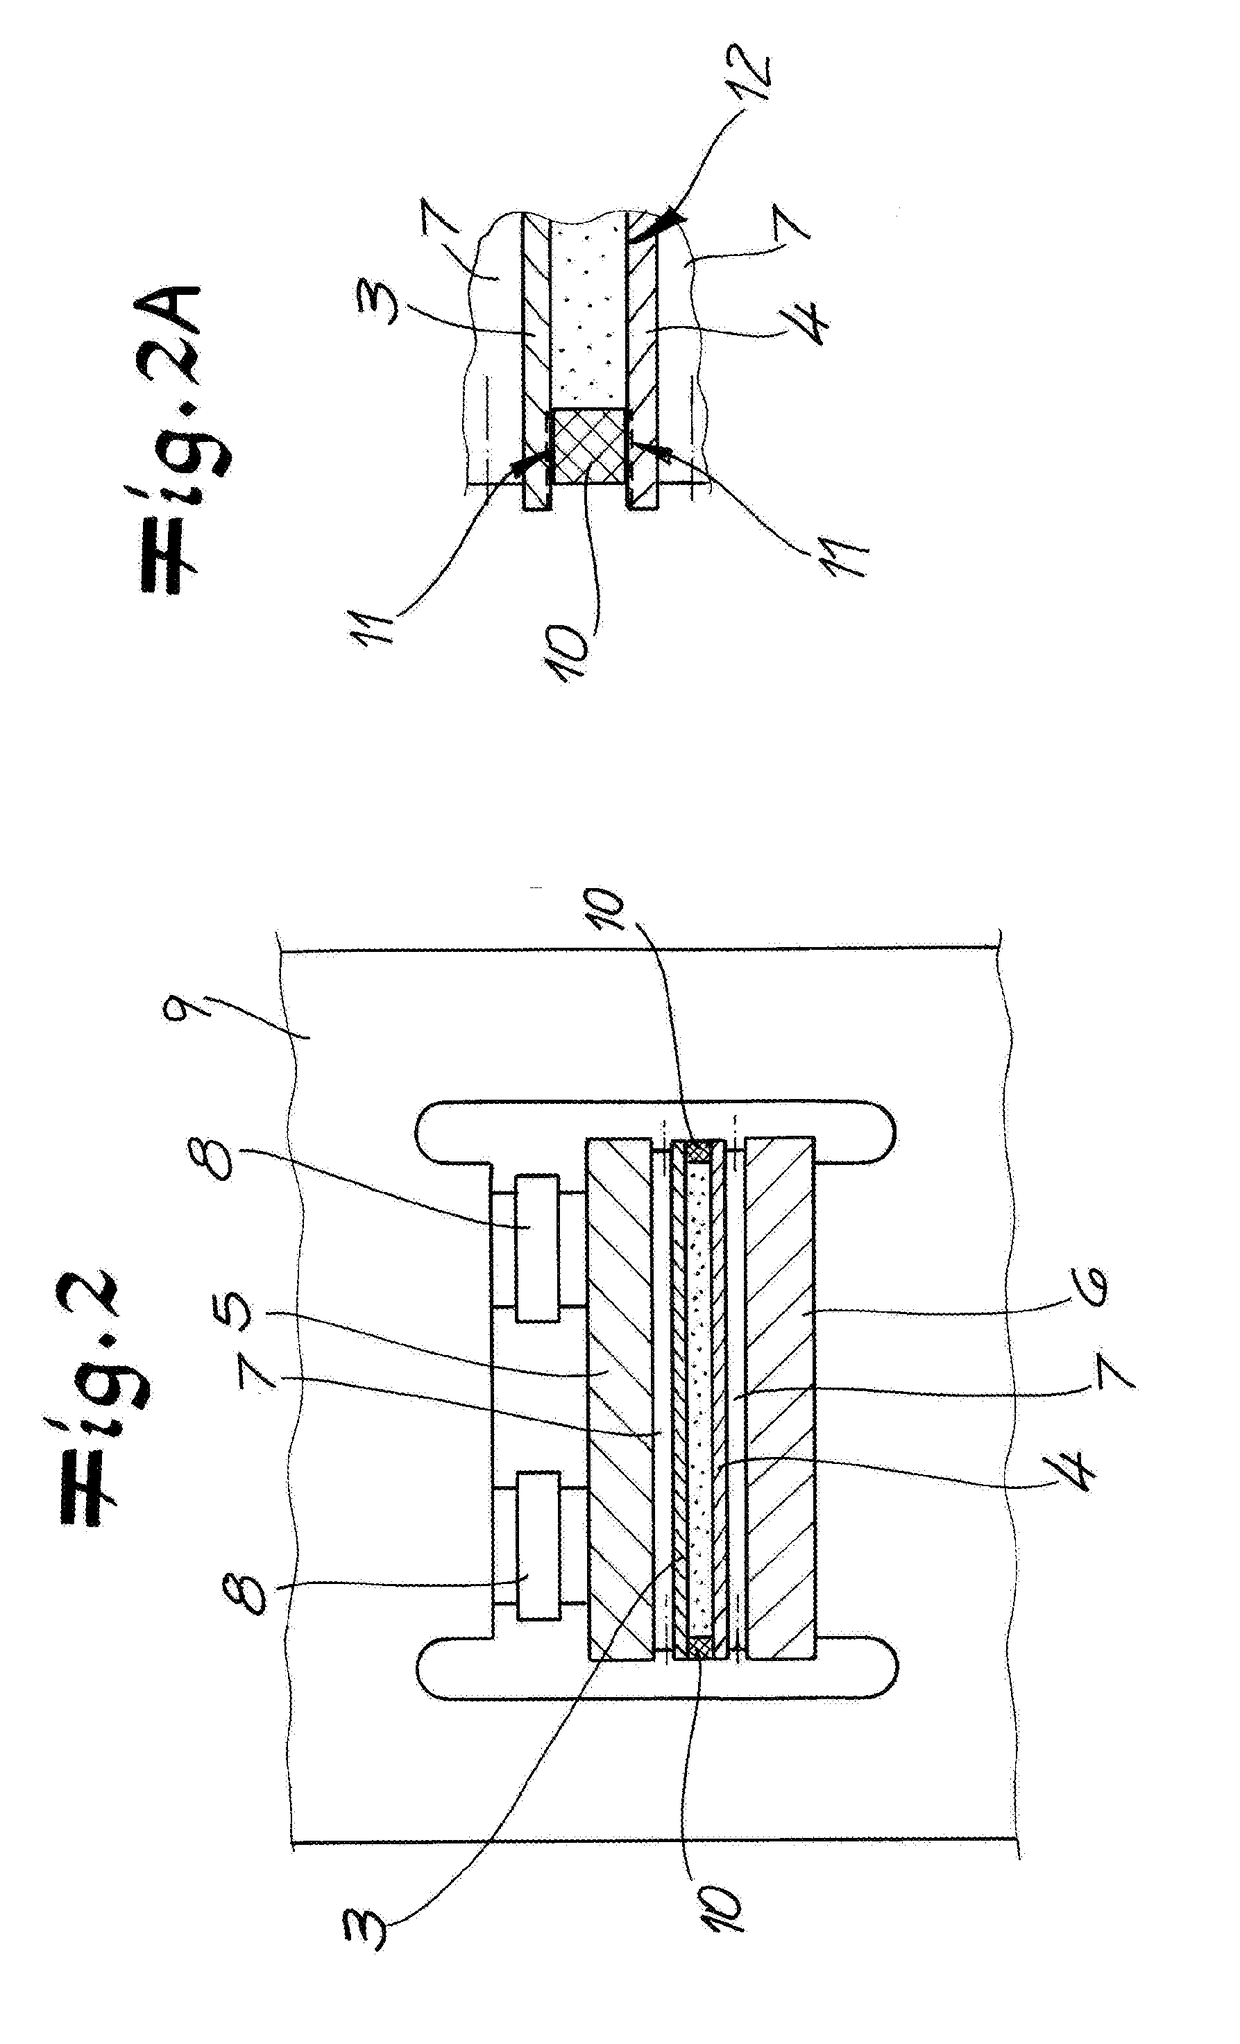 Continuous sheet press and method of operating same